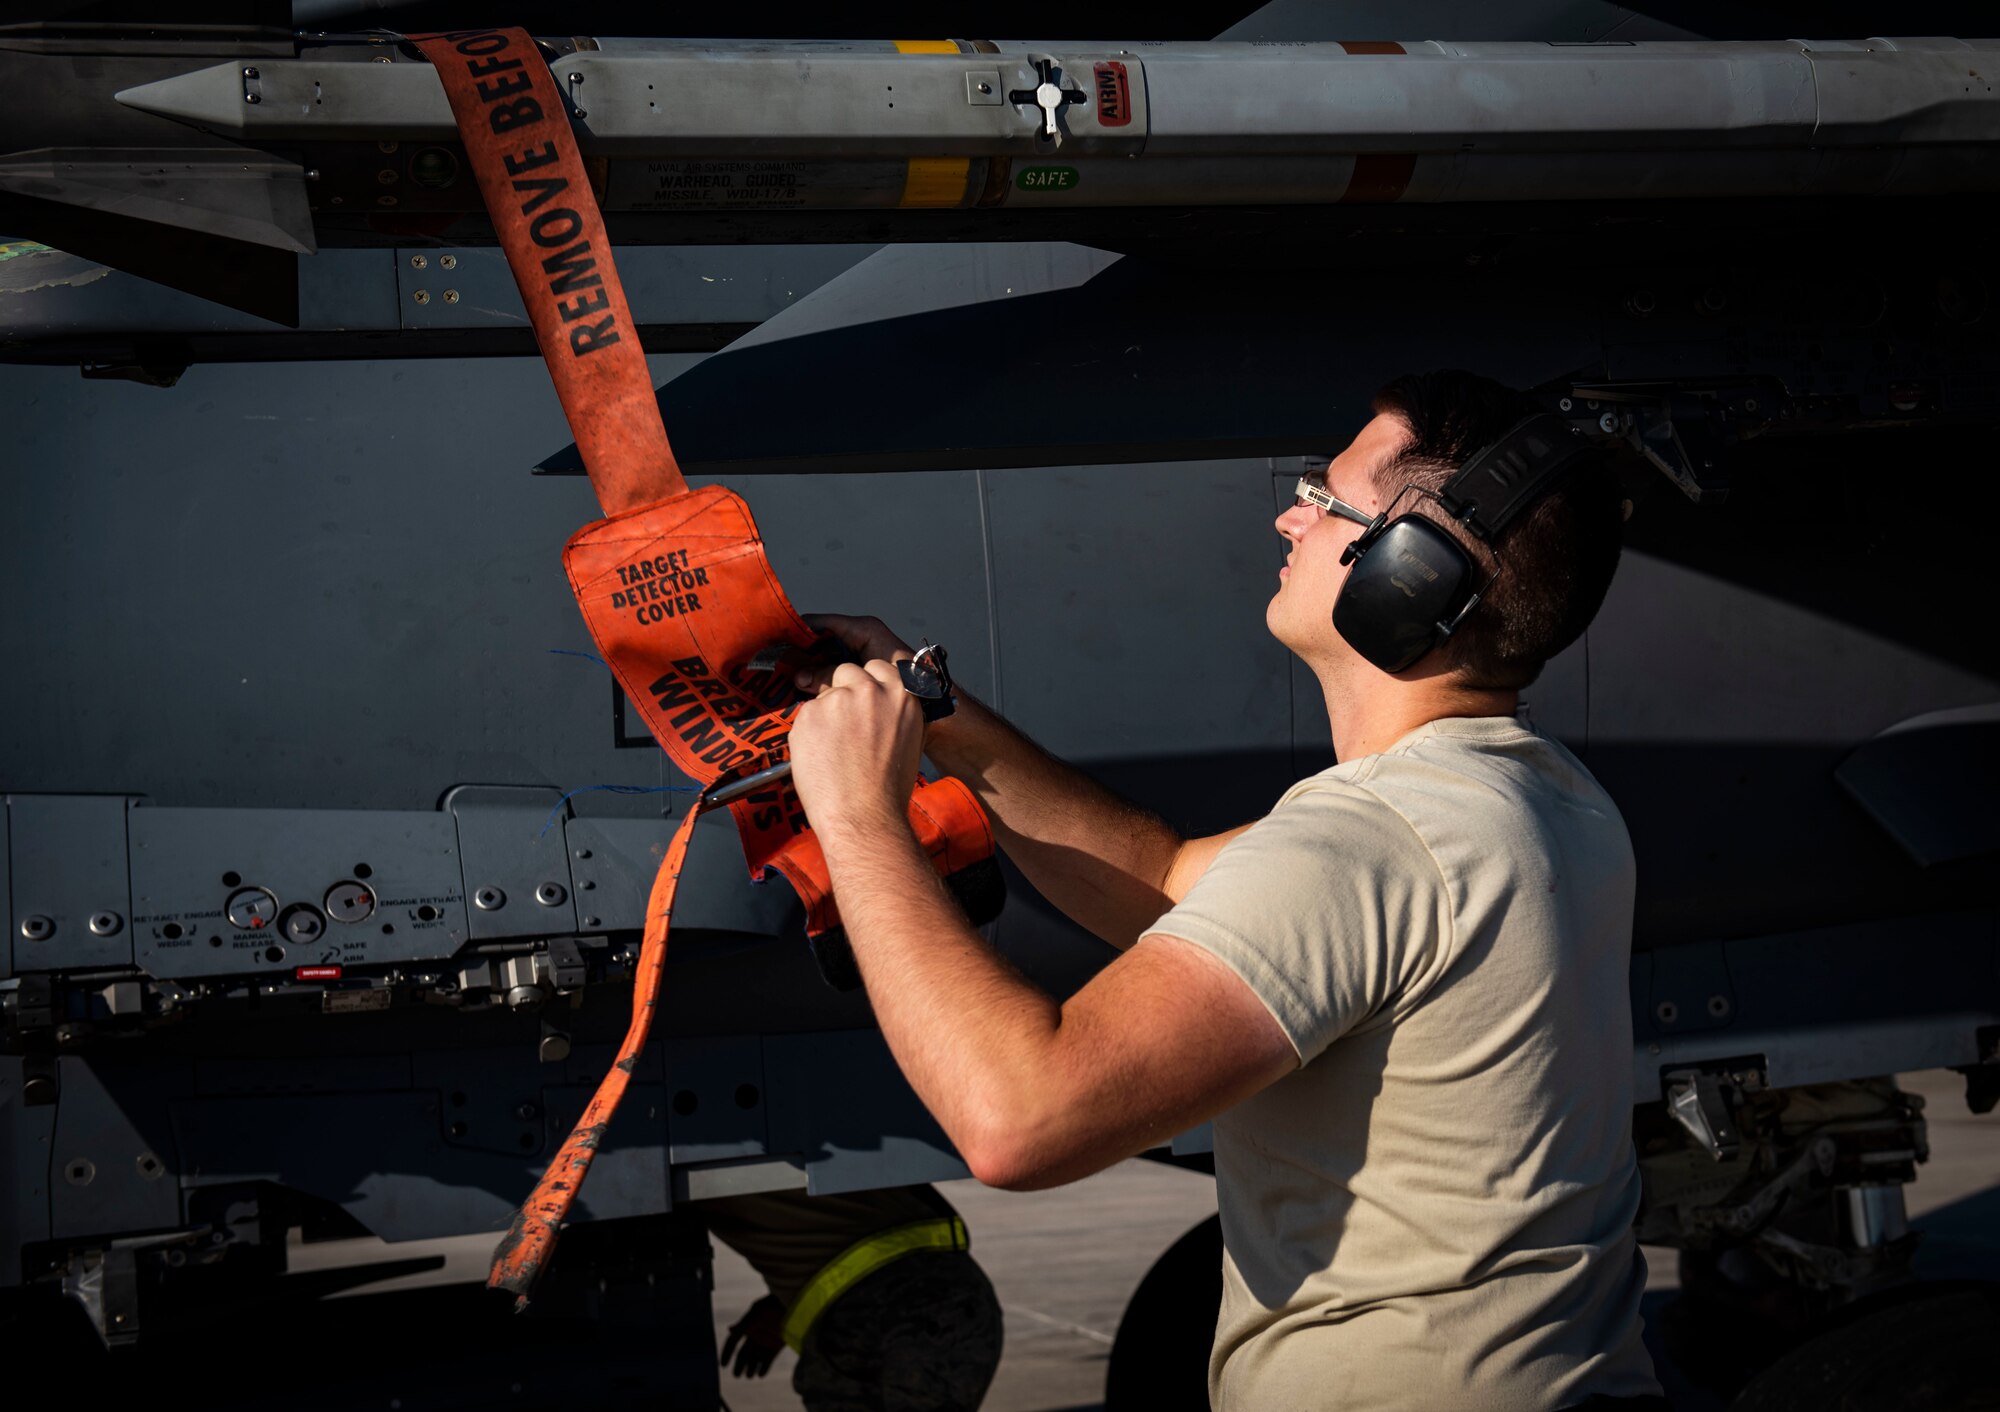 Staff Sgt. Troy Everson, 757th Aircraft Maintenance Squadron aircraft armament systems technician, prepares an F-15E Strike Eagle fighter jet for takeoff during Combat Archer 19-12 on Tyndall Air Force Base, Fla., Sept. 24, 2019. A new software on the F-15E aircraft was evaluated during this iteration of Combat Archer. (U.S. Air Force photo by Airman 1st Class Bailee A. Darbasie)